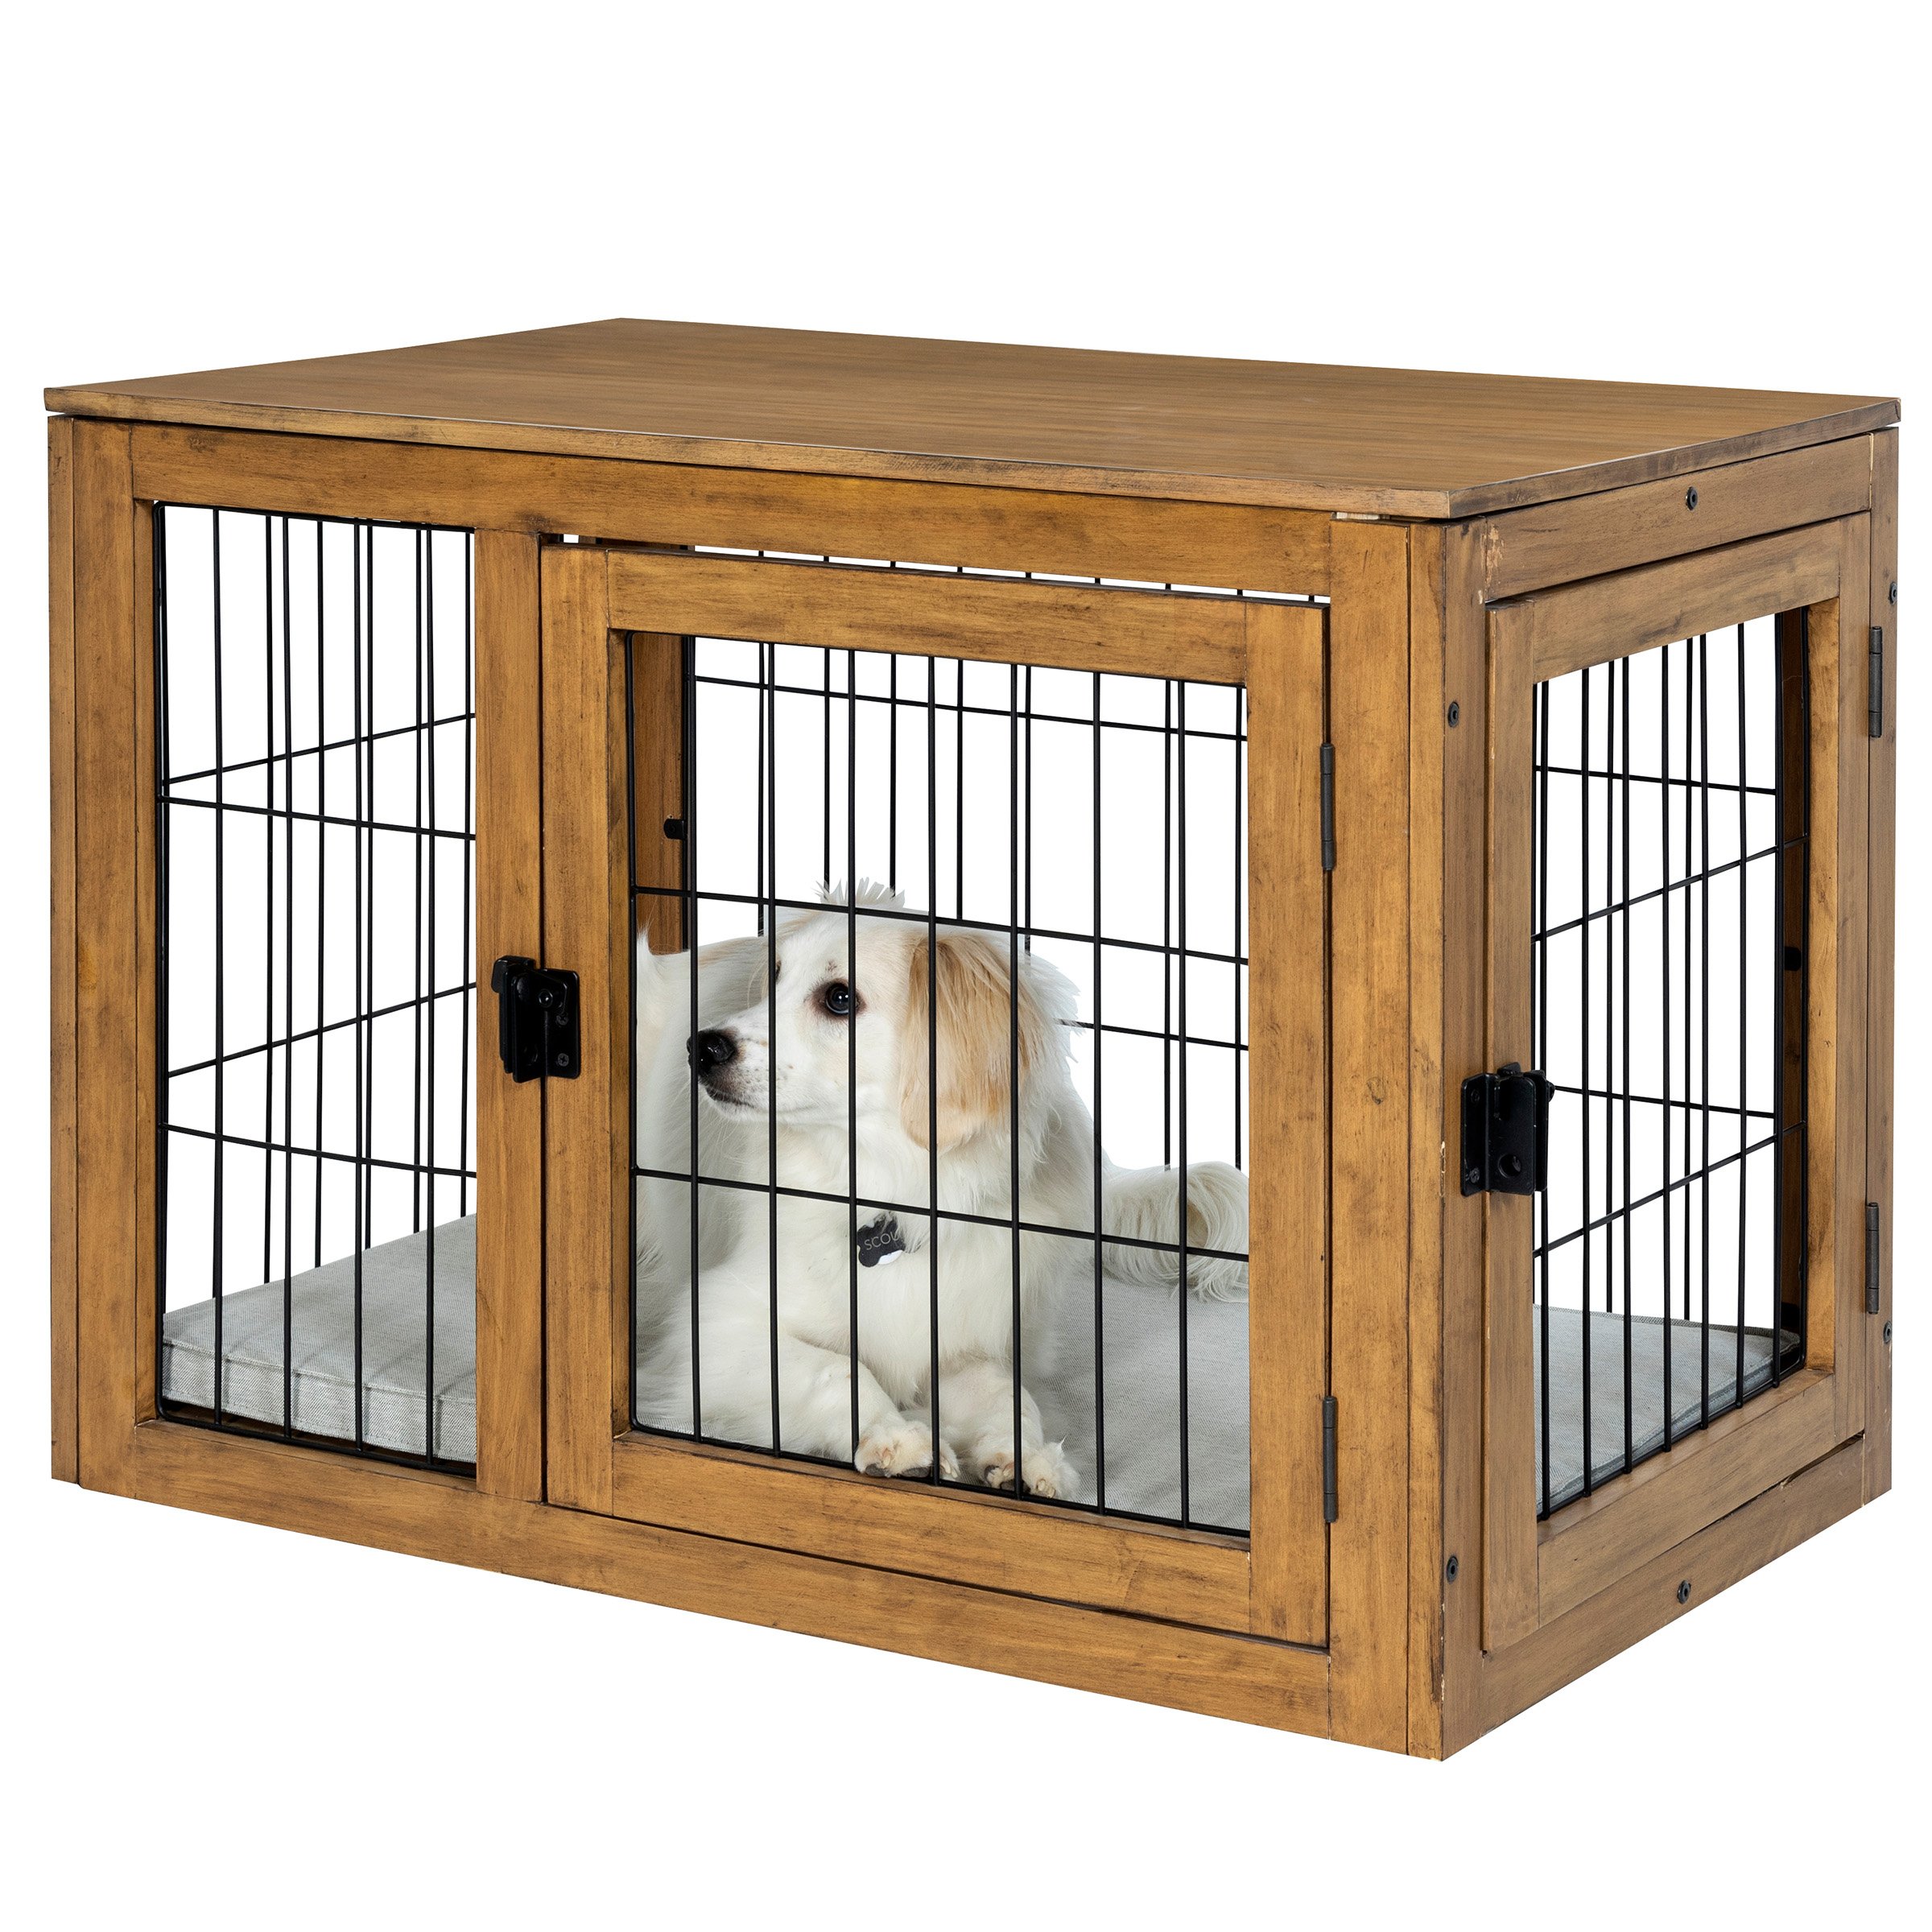 Furniture-Style Dog Crate - Acacia Wood Kennel For Medium Dogs With Double Doors And Cushion - Dog Cage Furniture By PETMAKER (Natural)